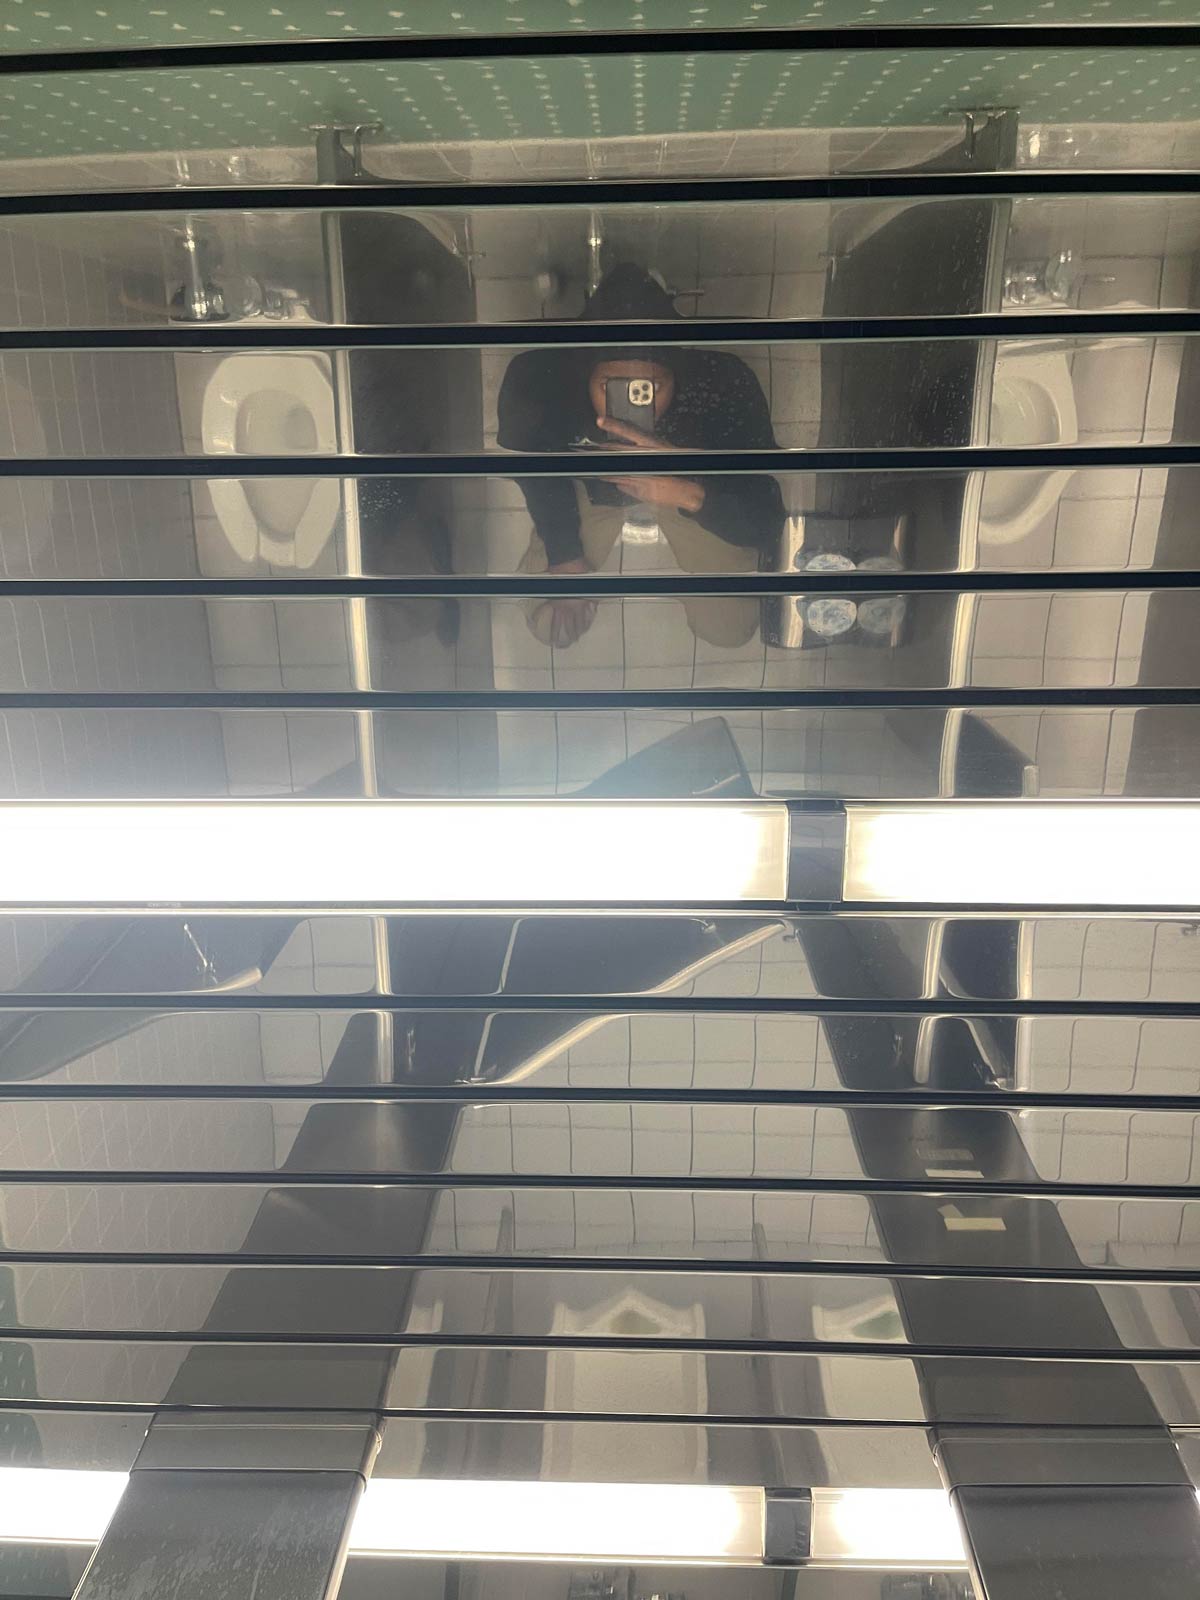 This mirrored ceiling in our bathroom at work